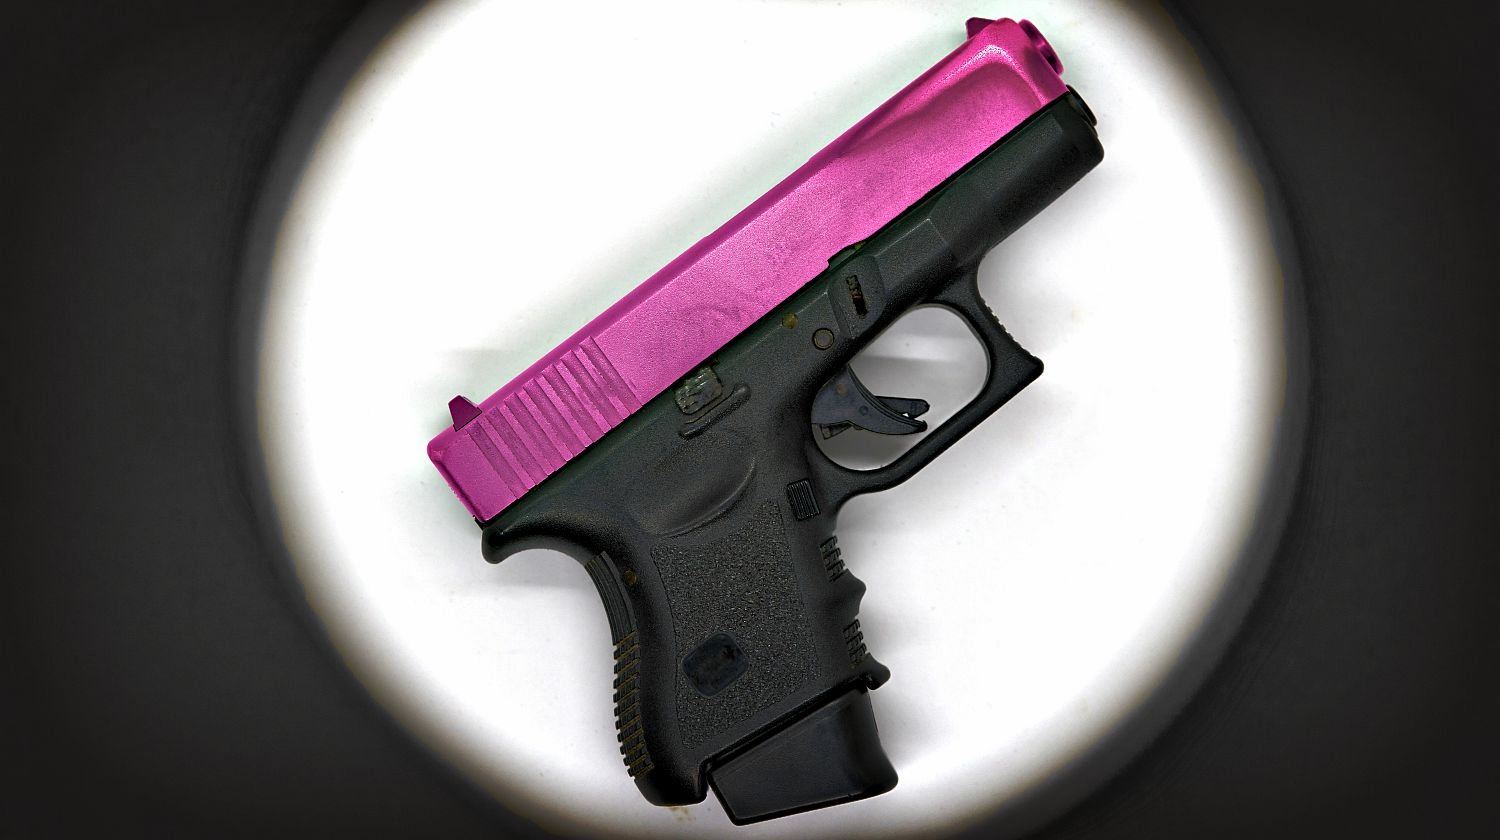 Feature | Shot gun or pistol in black color grip part and pink chrome slide barrel,use 9 mm ammunition with magazine grip accessory | How To Paint A Glock Slide